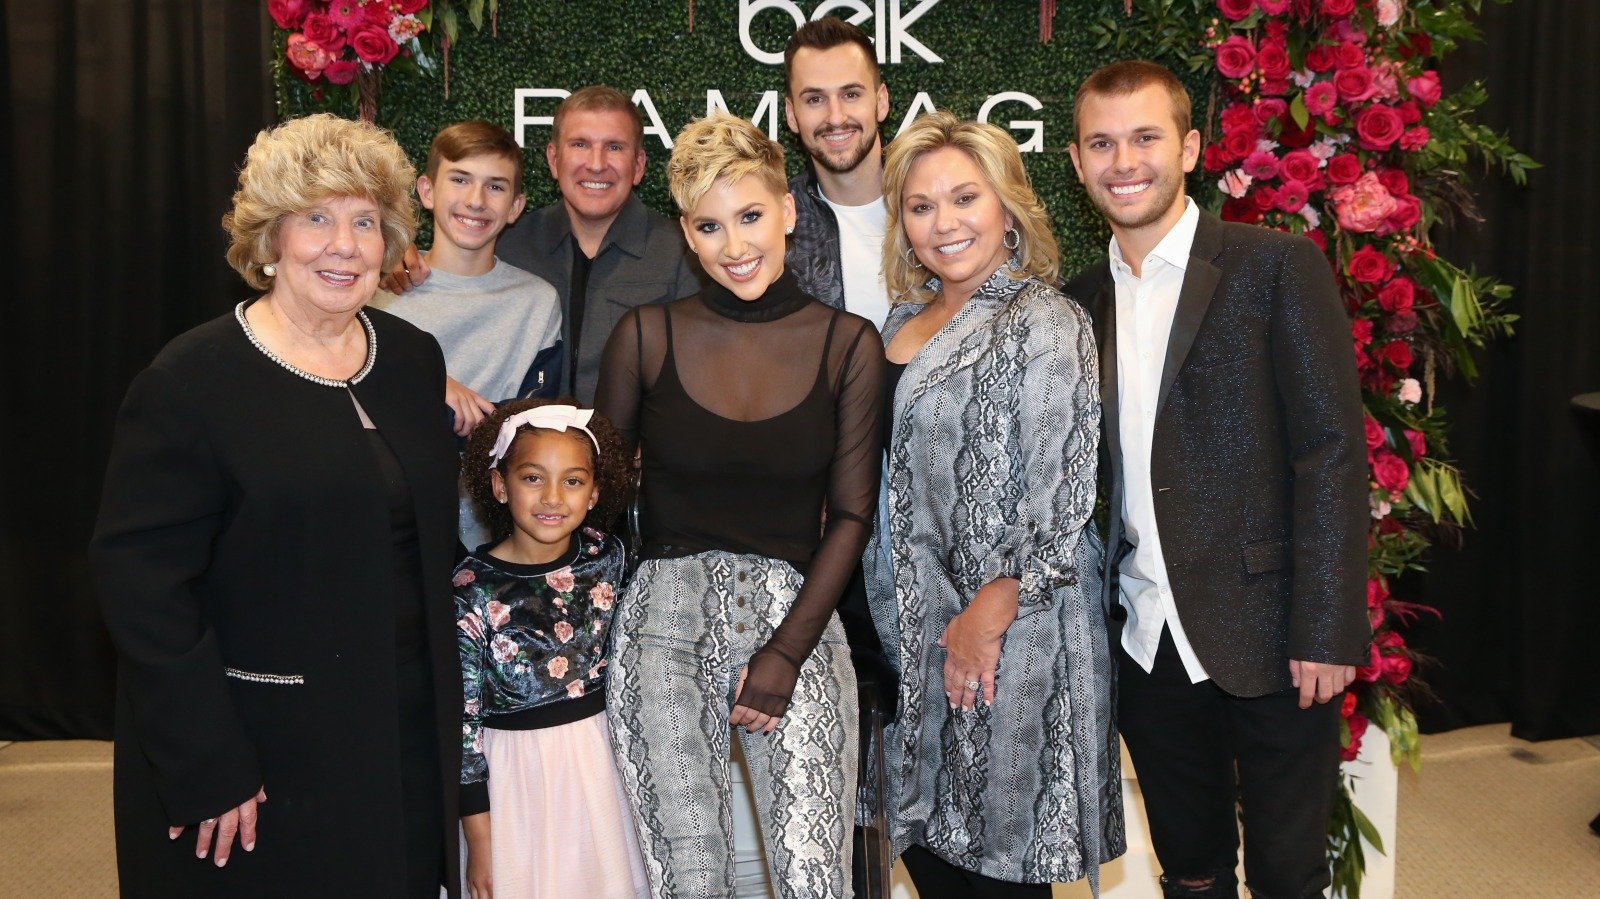 The Richest Member Of The Chrisley Family May Surprise You